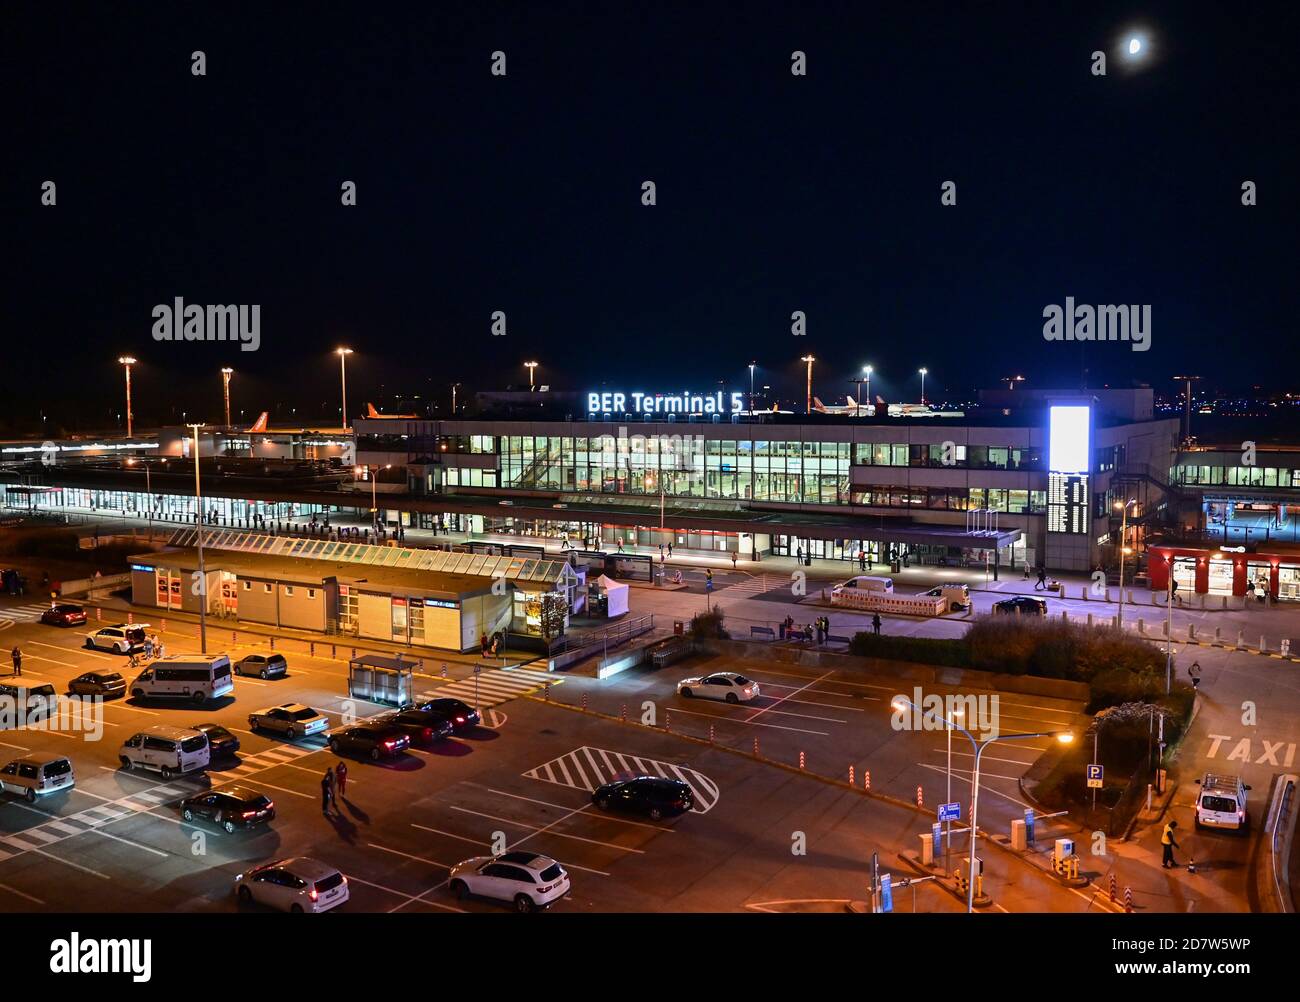 25 October 2020, Brandenburg, Schönefeld: The new lettering 'BER Terminal 5' lights up in the evening on the roof of the former Berlin Schönefeld airport. Berlin's airports are given the new abbreviation BER. A few days before the opening of the new Capital Airport, the previous codes TXL (Tegel) and SXF (Schoenefeld) will no longer be used when the winter timetable changes. The opening of the Capital Airport BER is planned for 31.10.2020. Photo: Patrick Pleul/dpa-Zentralbild/ZB Stock Photo